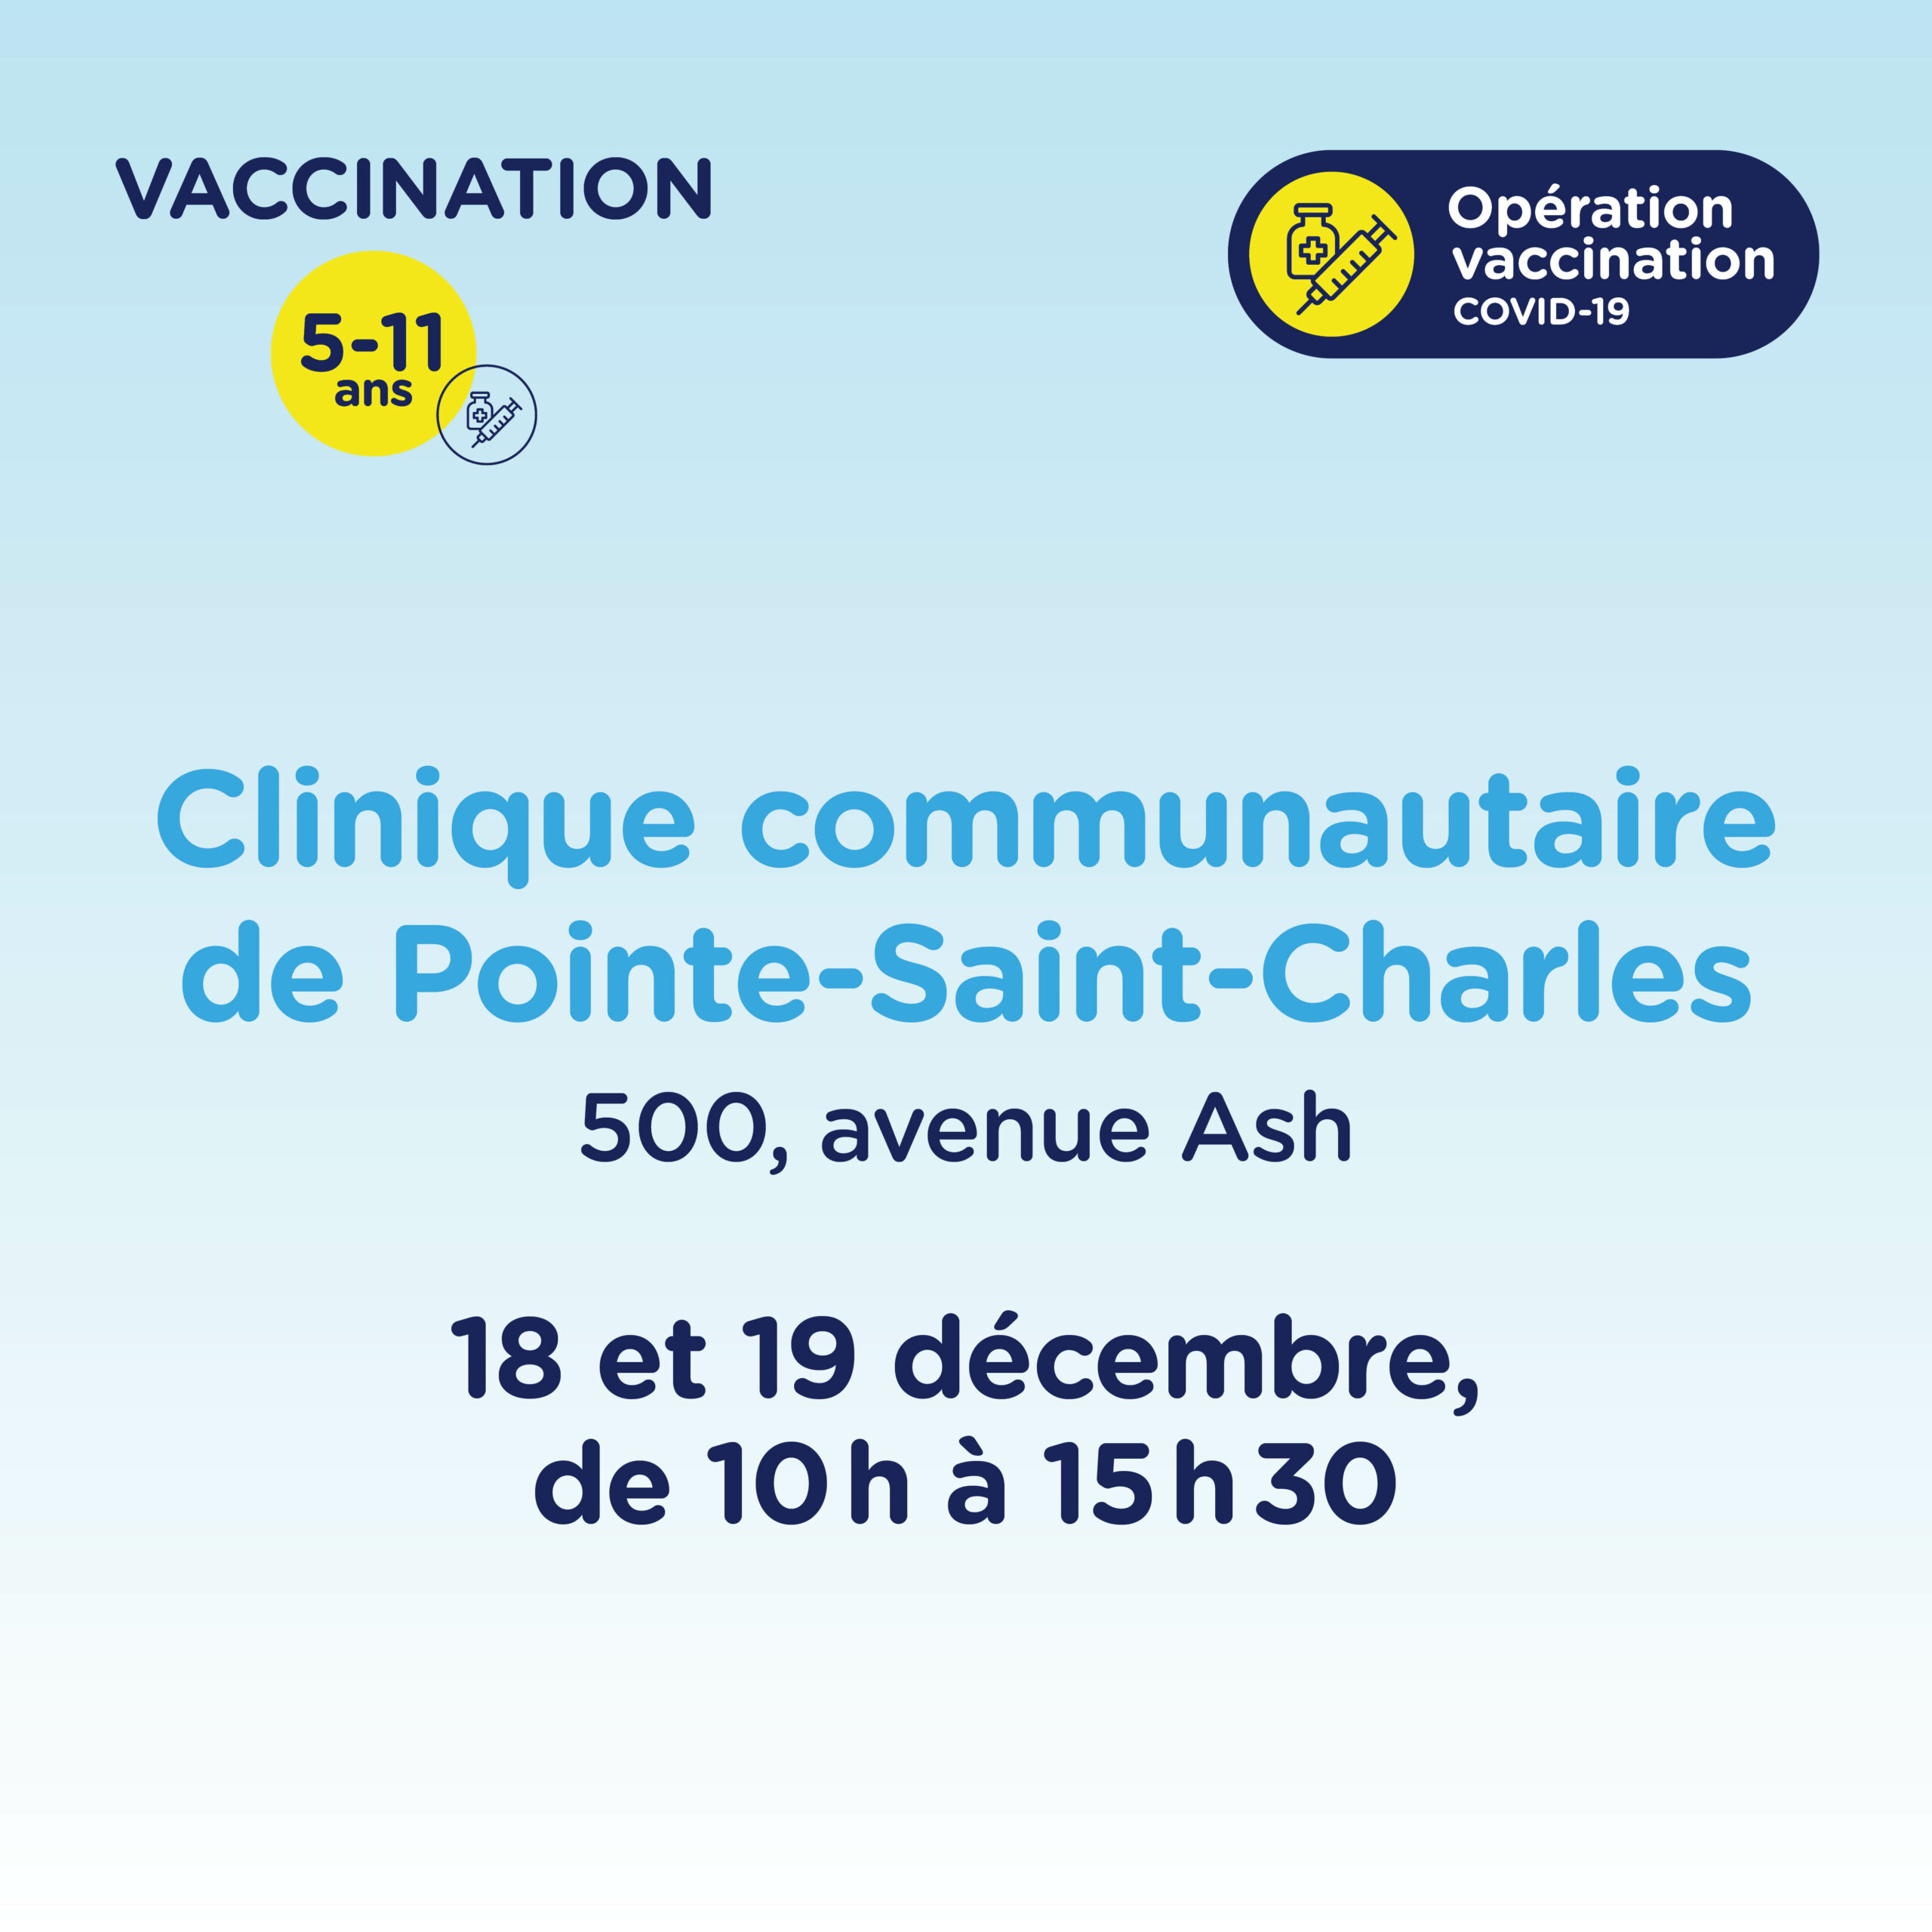 COVID-19 vaccination for the 5 to 11 years old